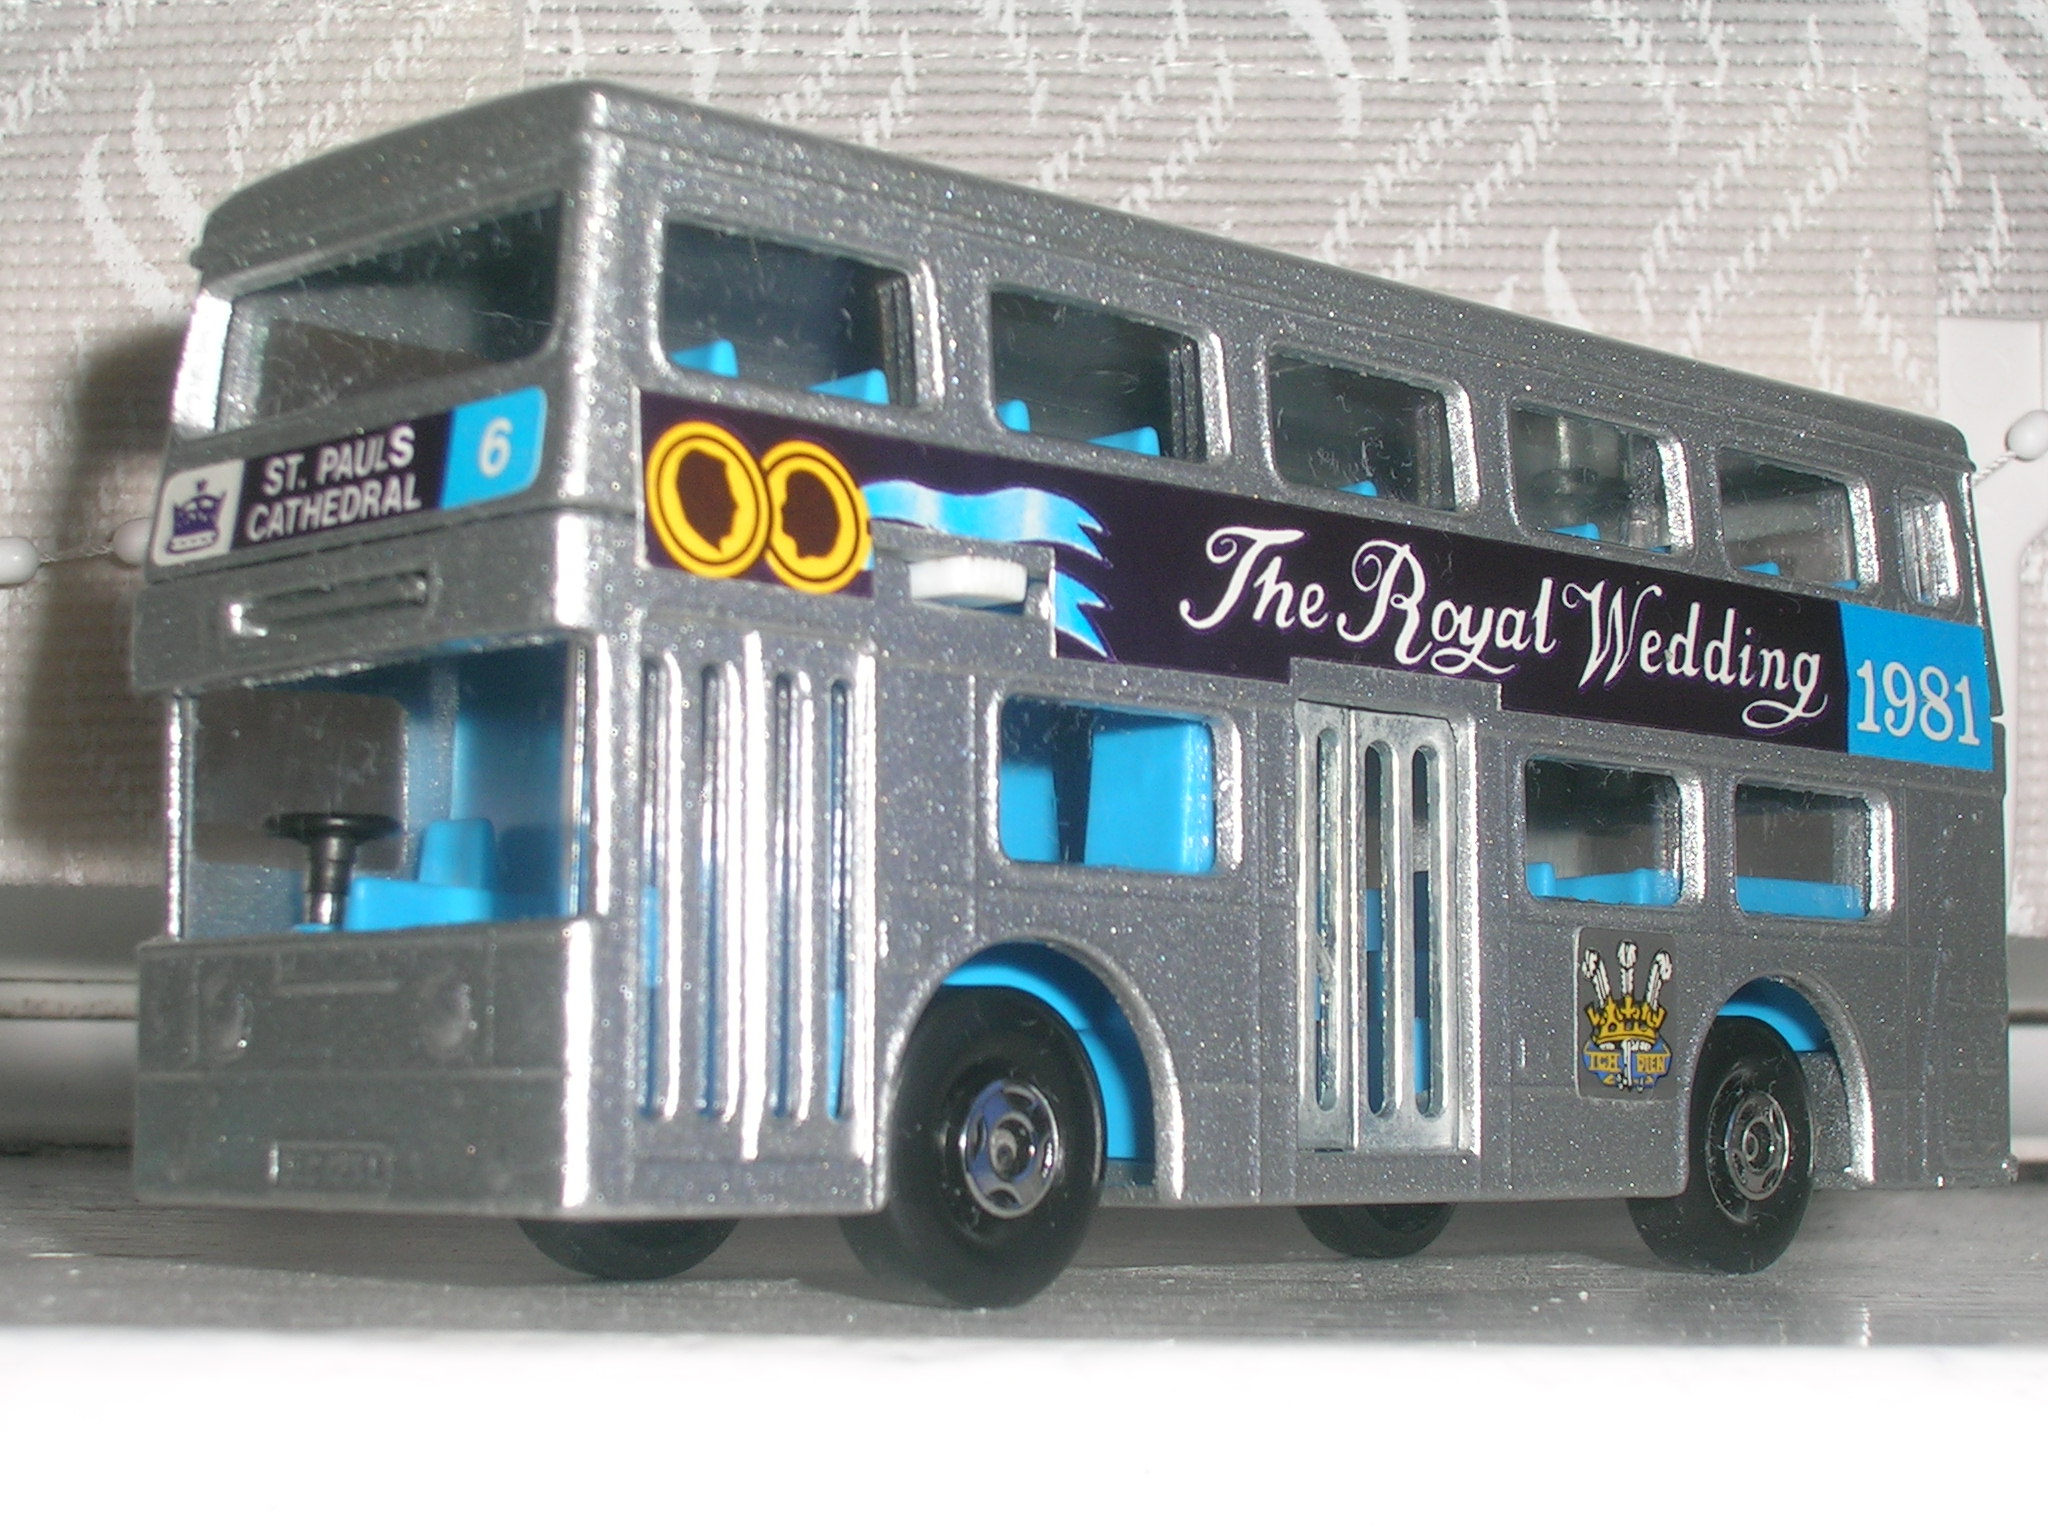 a model london bus that is part of the royal wedding bus